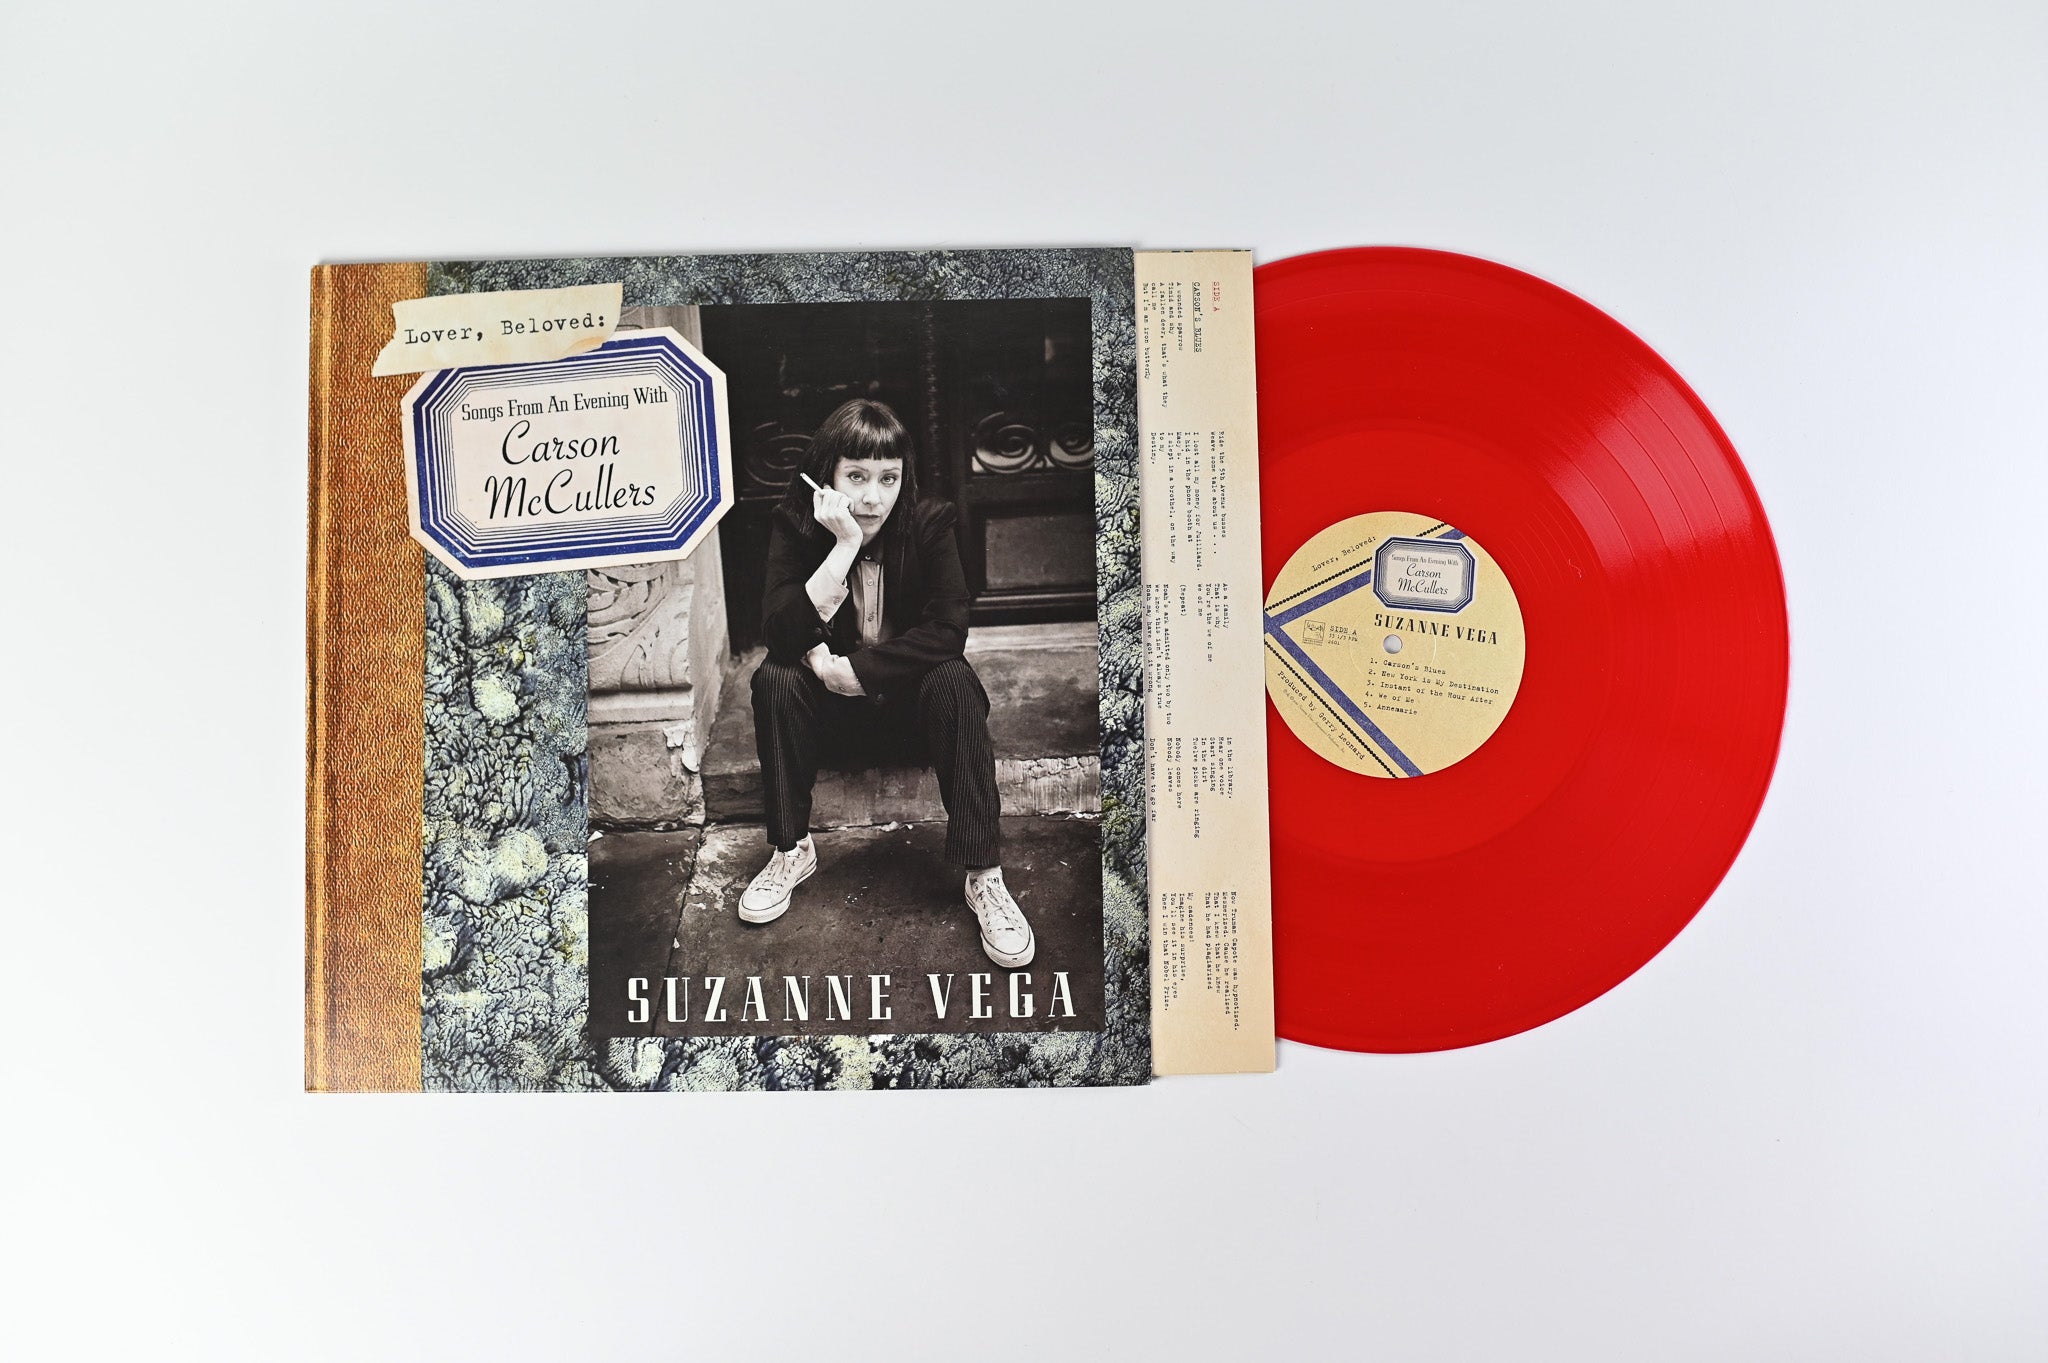 Suzanne Vega - Lover, Beloved: Songs From An Evening With Carson McCullers on Amanuensis Productions - Red Vinyl